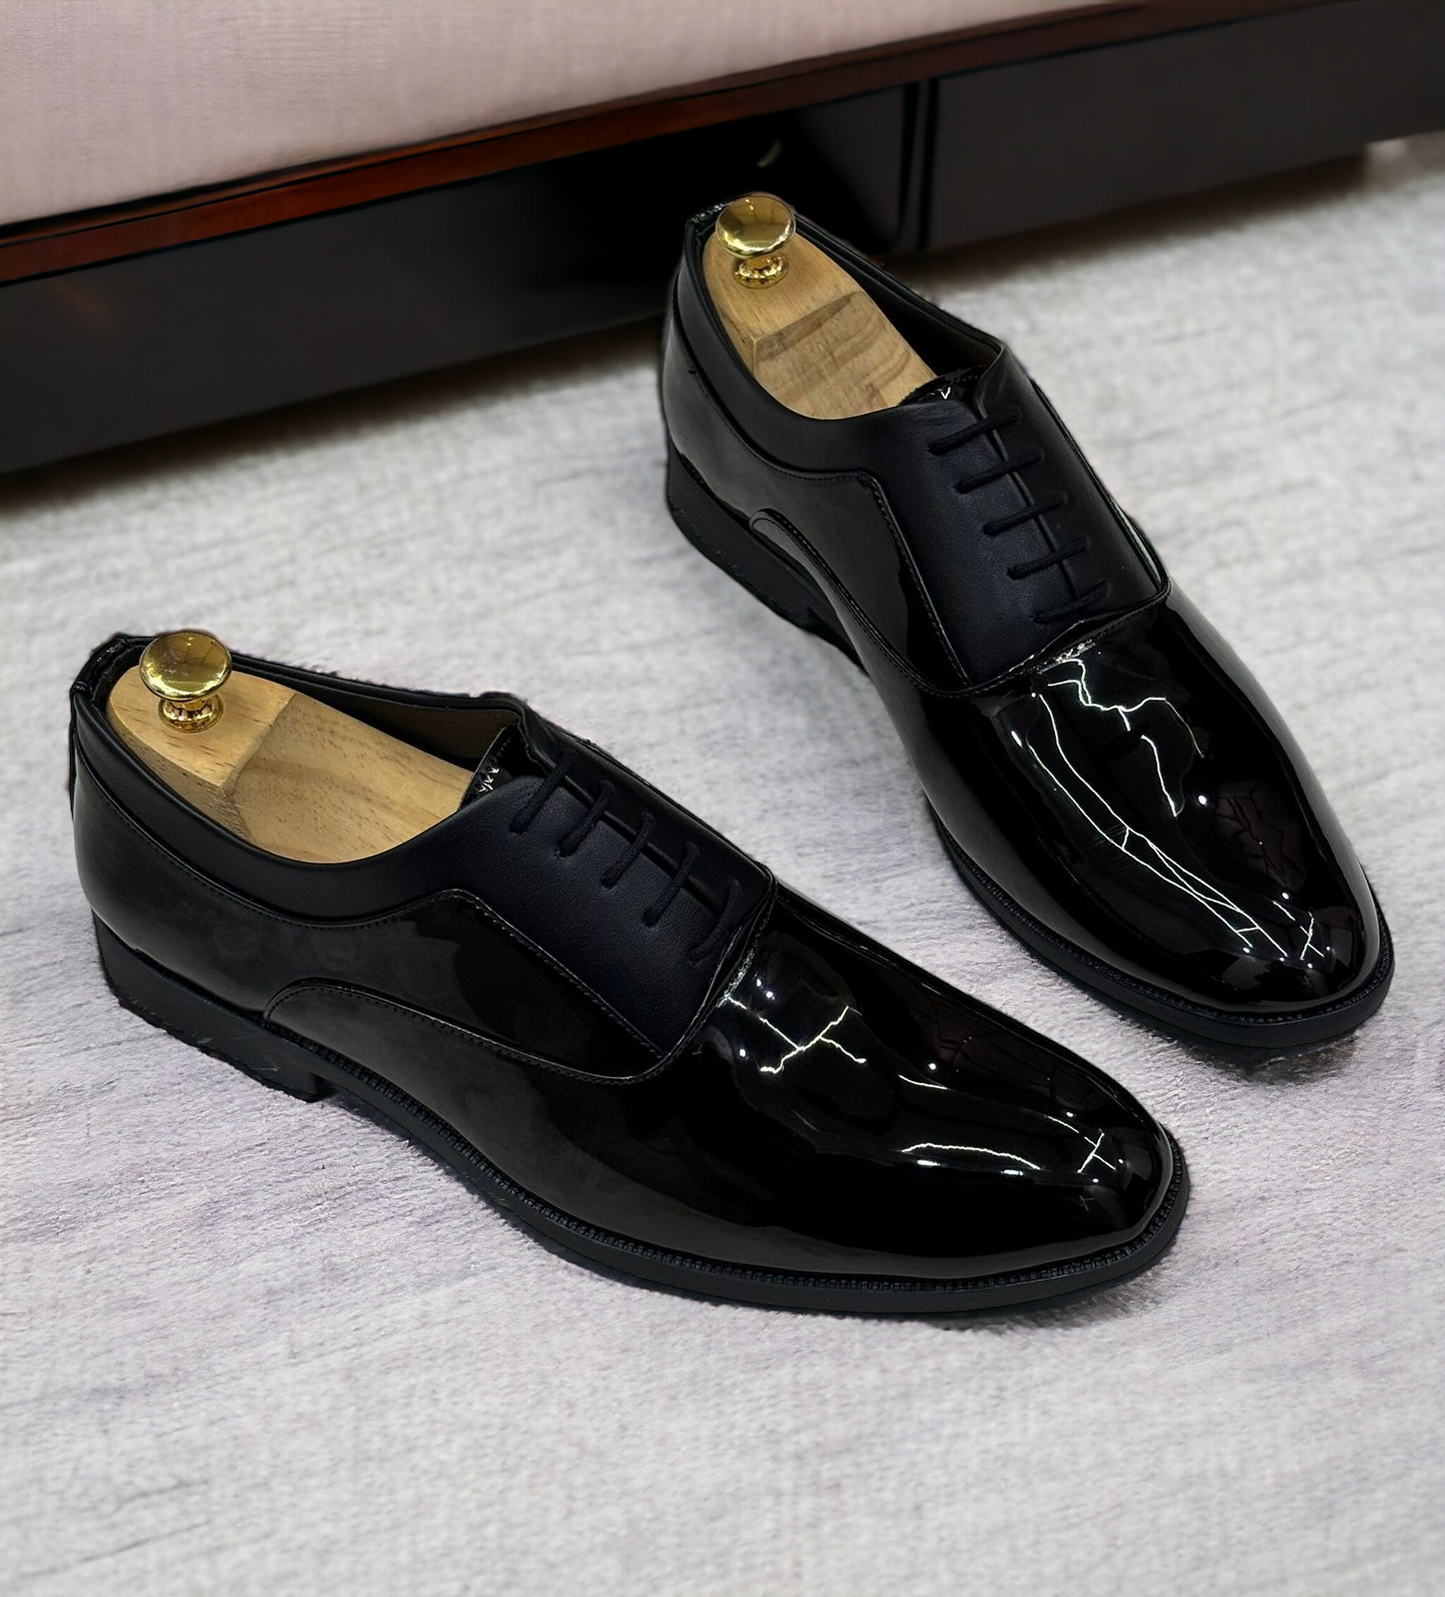 Jack Marc Shiny Oxford Lace-up Shoes Formal Style from Business to Black-Tie